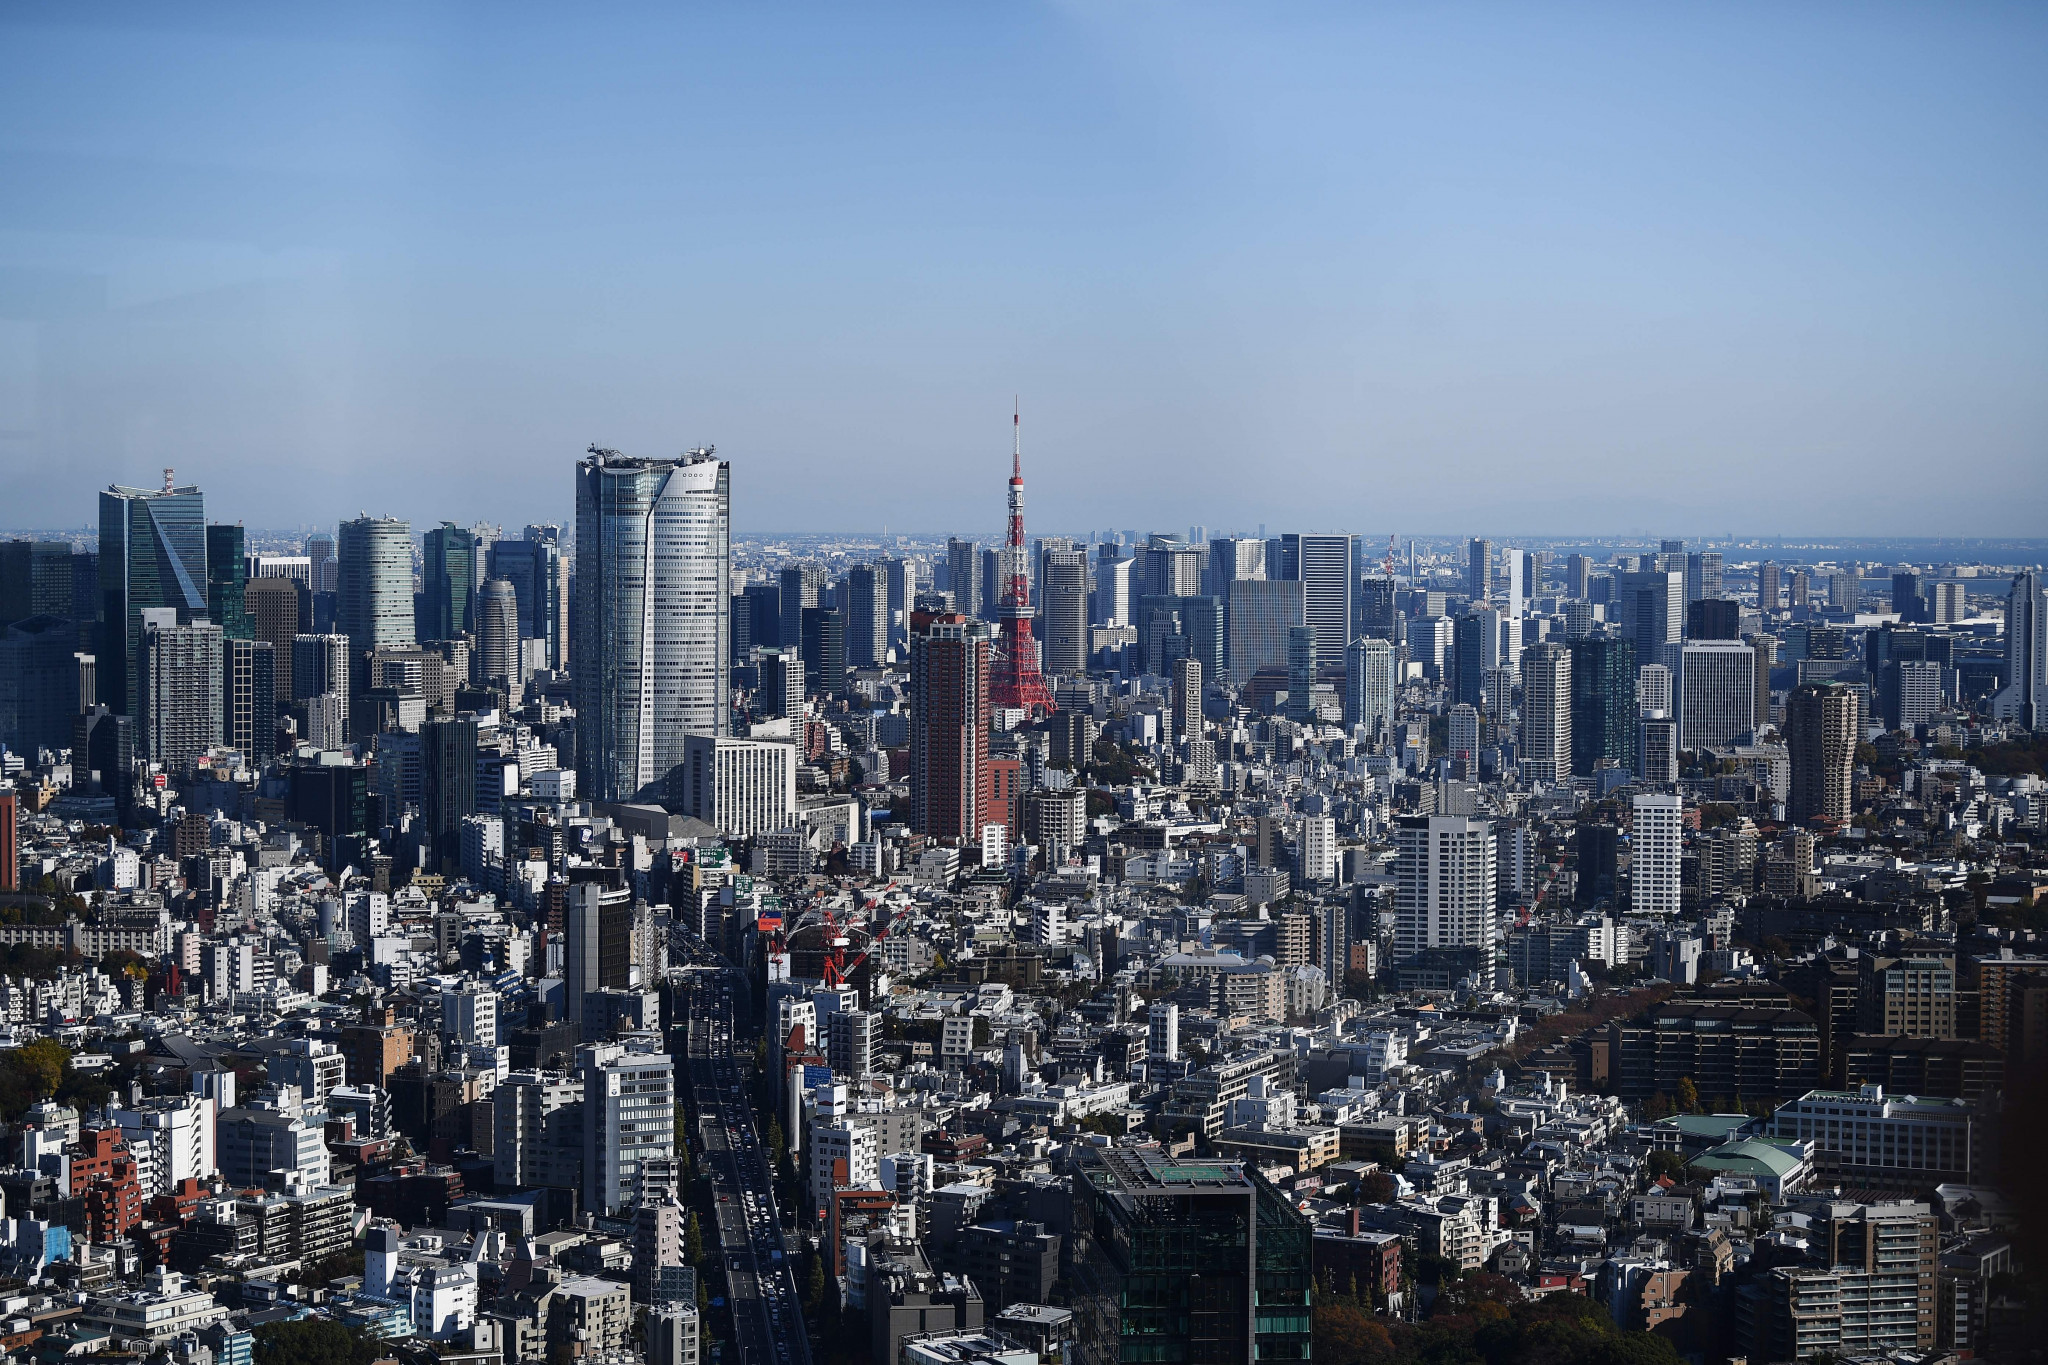 Tokyo is still reported to be short of 14,000 hotel rooms for next year's hosting of the Olympic and Paralympic Games ©Getty Images